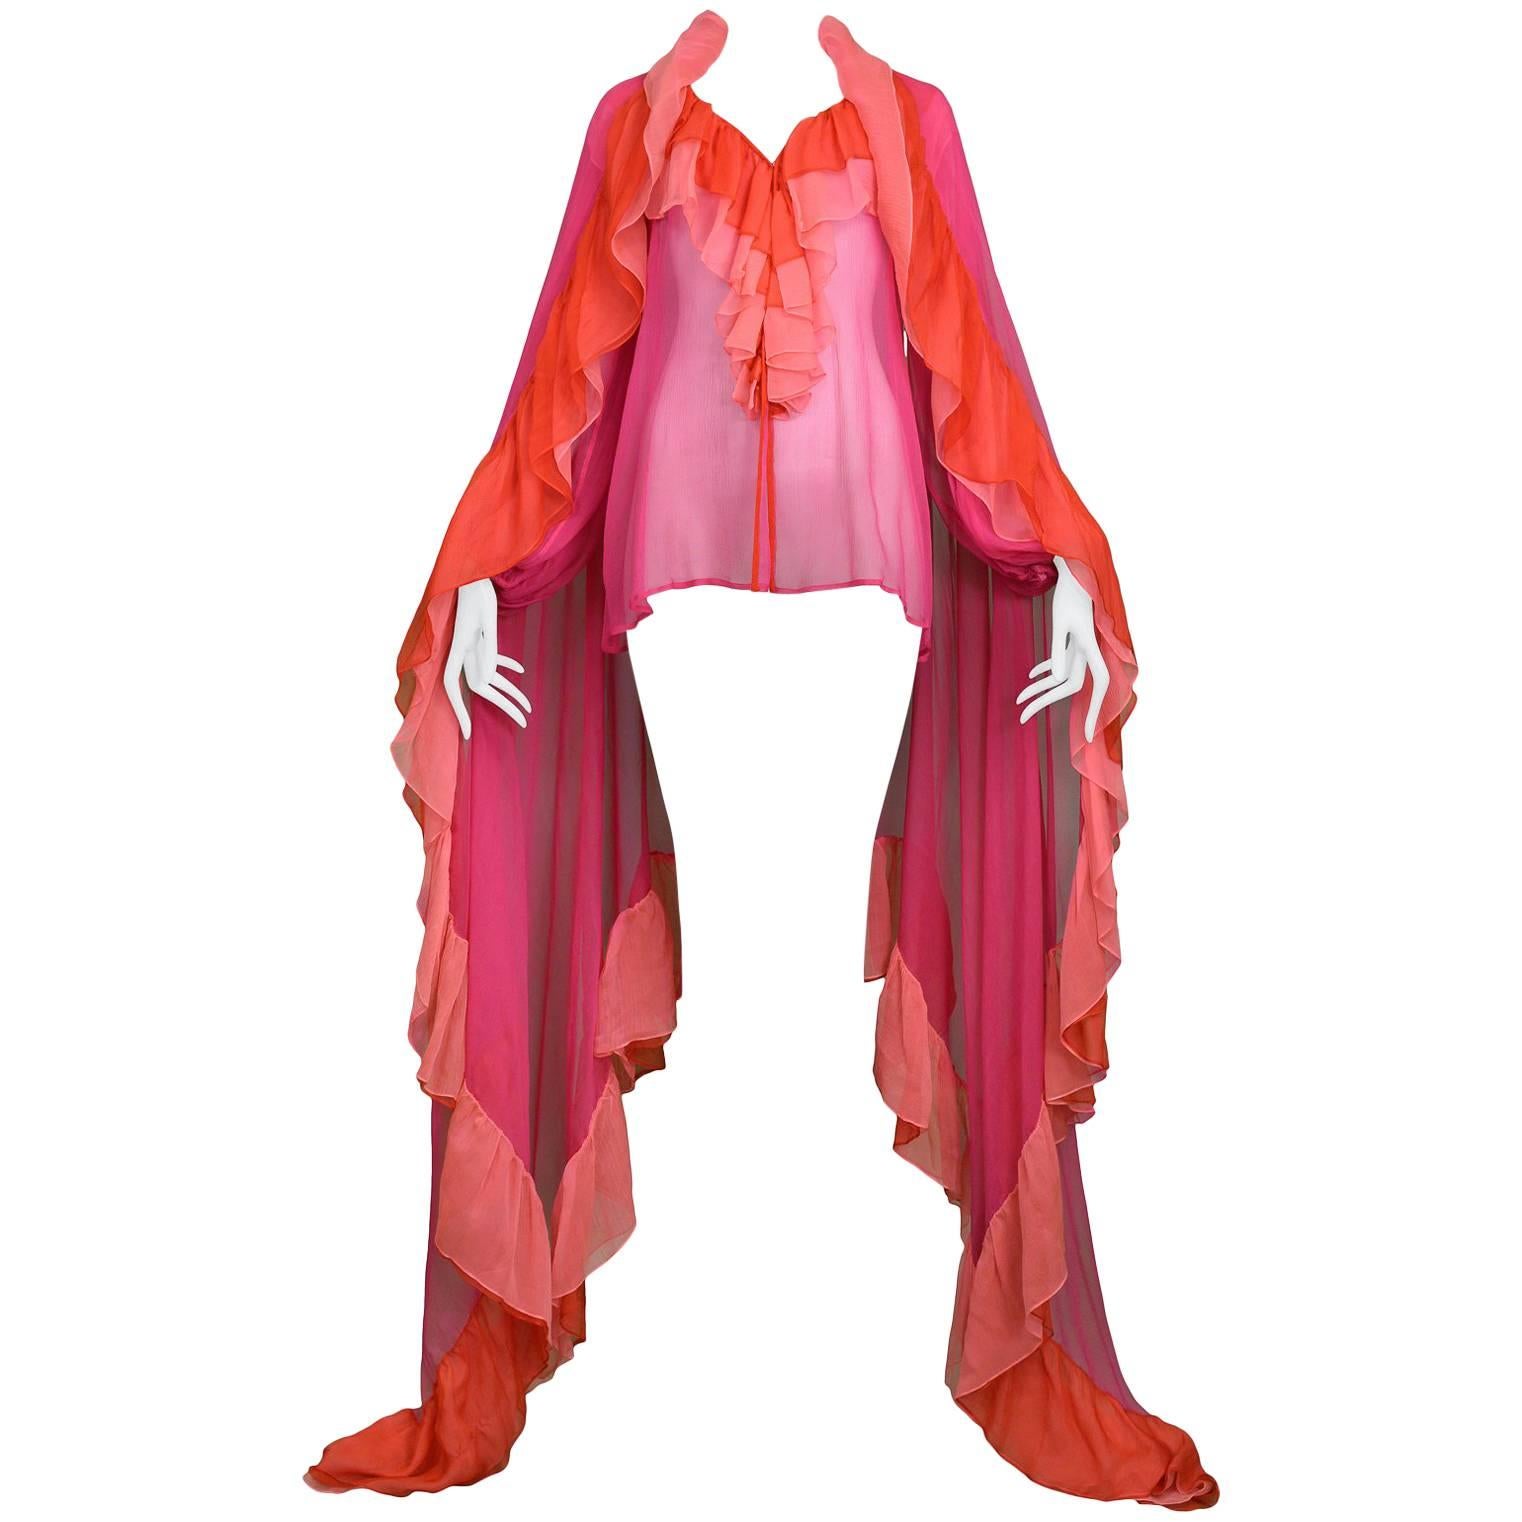 Yves Saint Laurent Hot Pink & Red Chiffon Peasant Blouse & Giant Ruffle Scarf